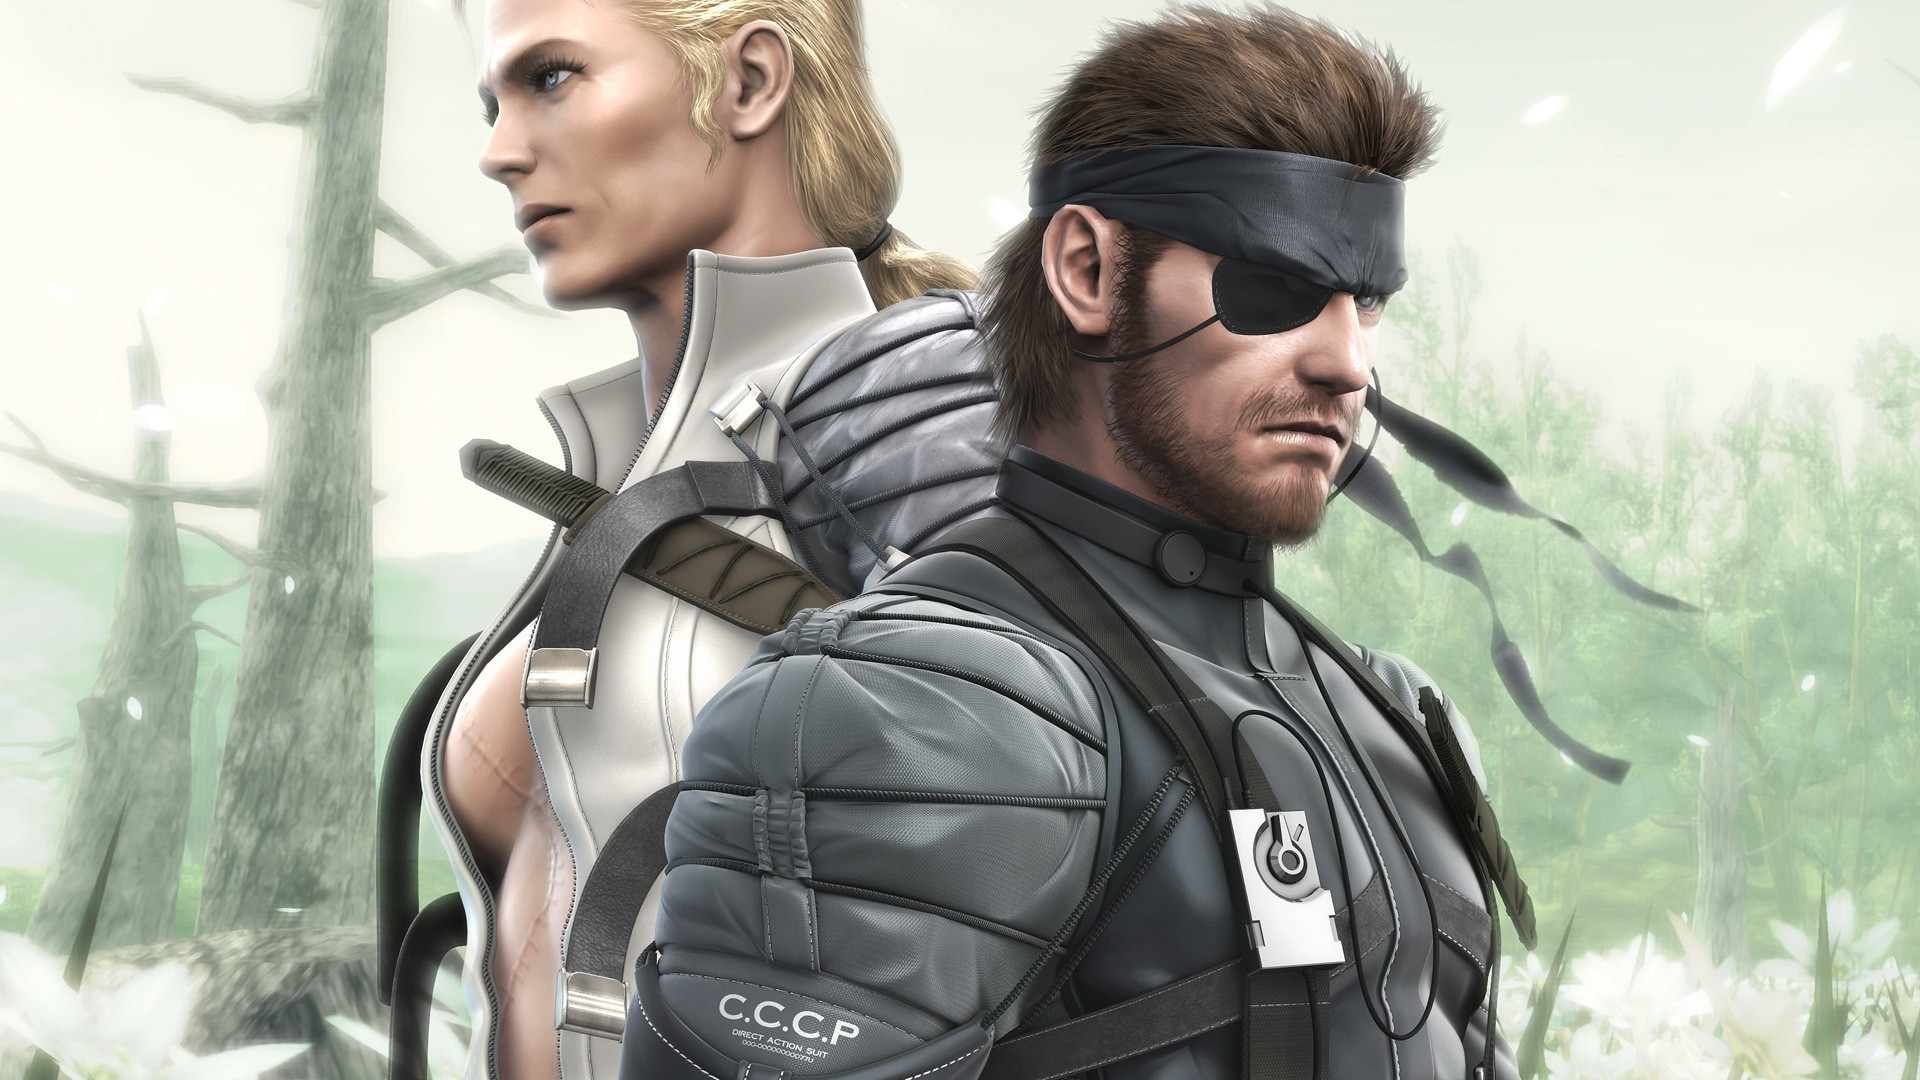 1920x1080 26 Metal Gear Solid 3: Snake Eater HD Wallpapers | Backgrounds | Adorable  Wallpapers | Pinterest | Hd wallpaper, Snake and Metal gear solid